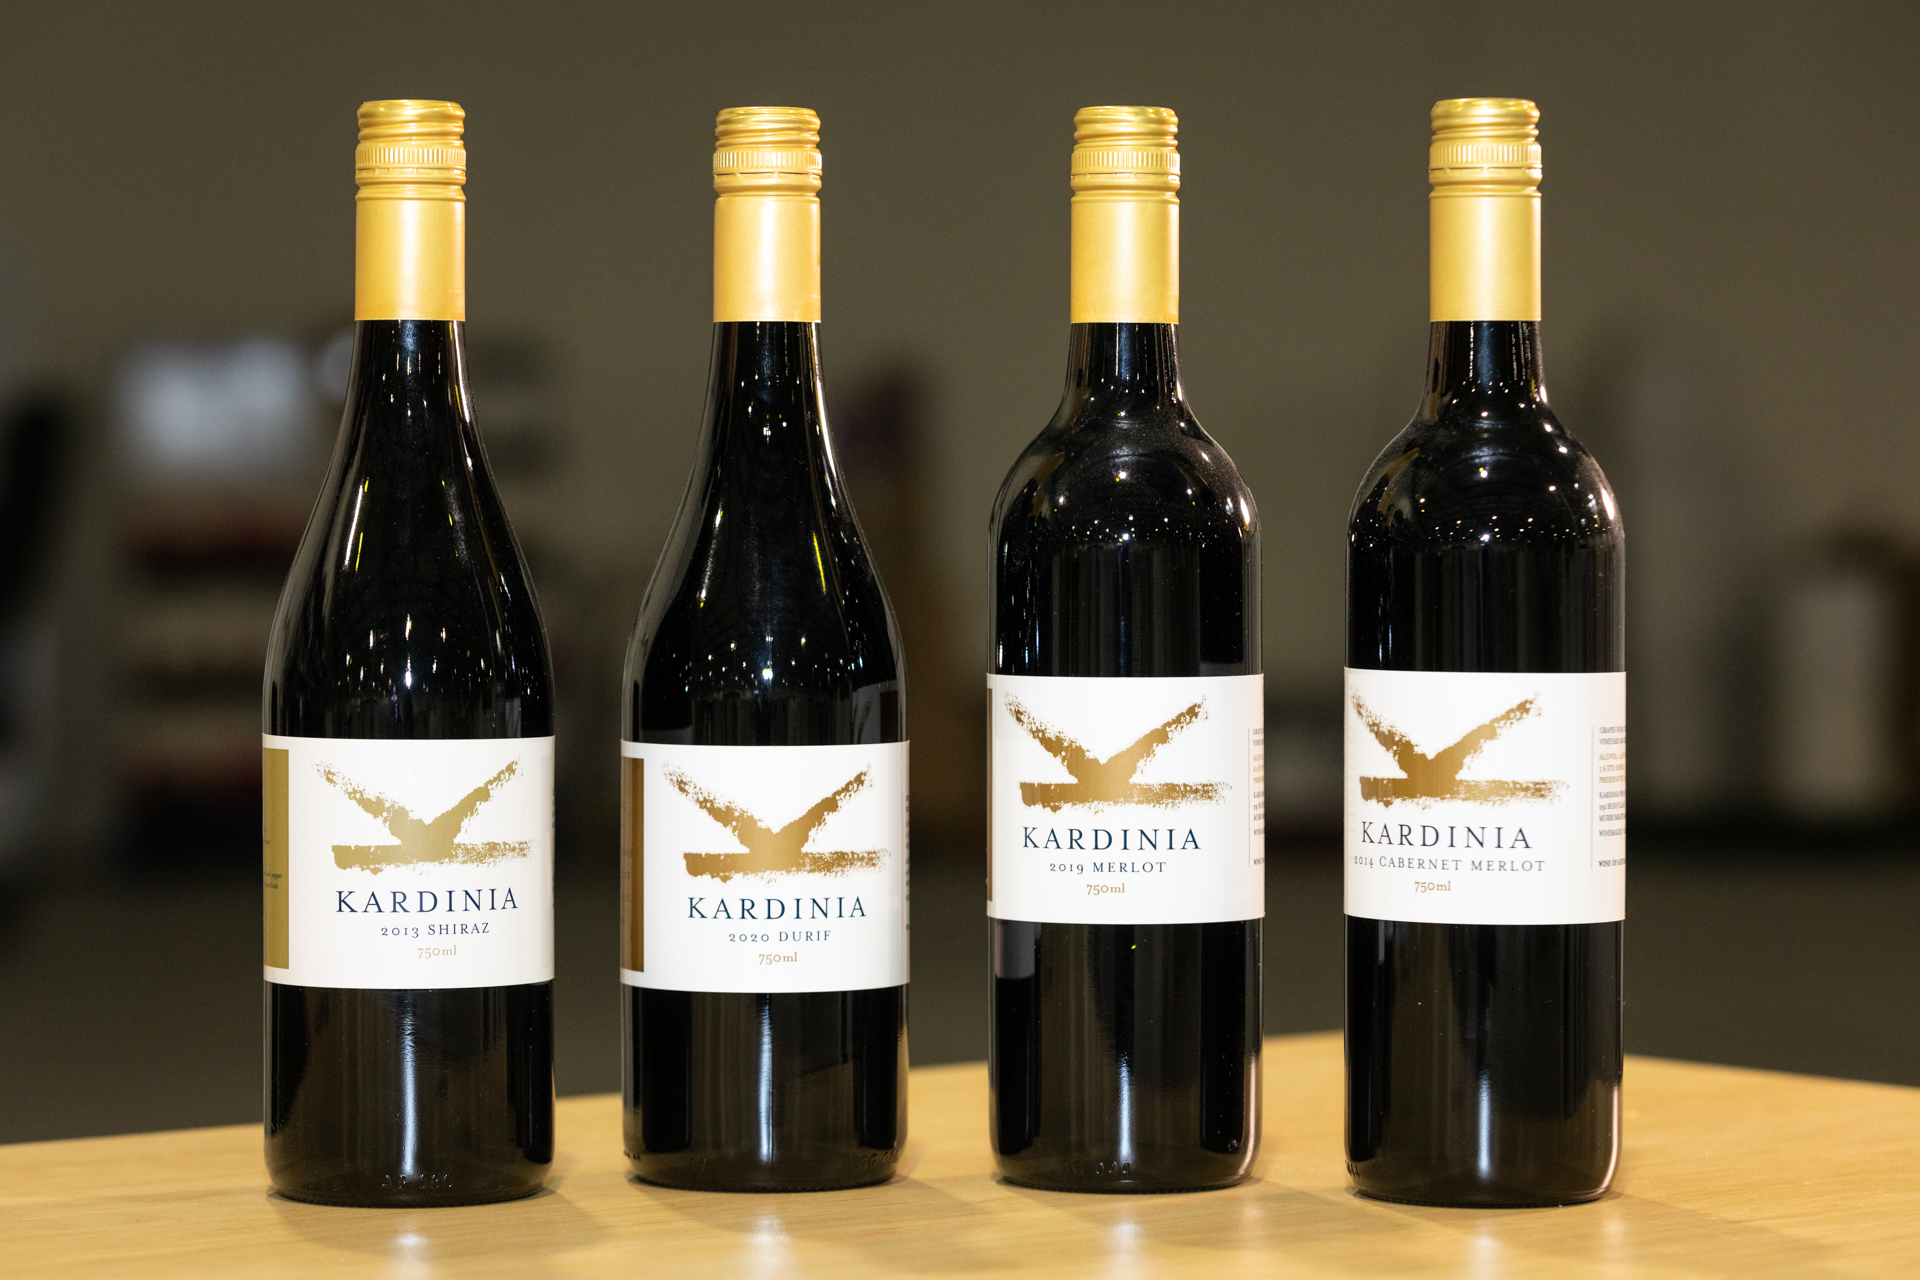 Kardinia's wines are a hidden gem for the adventurous Canberra wine drinker